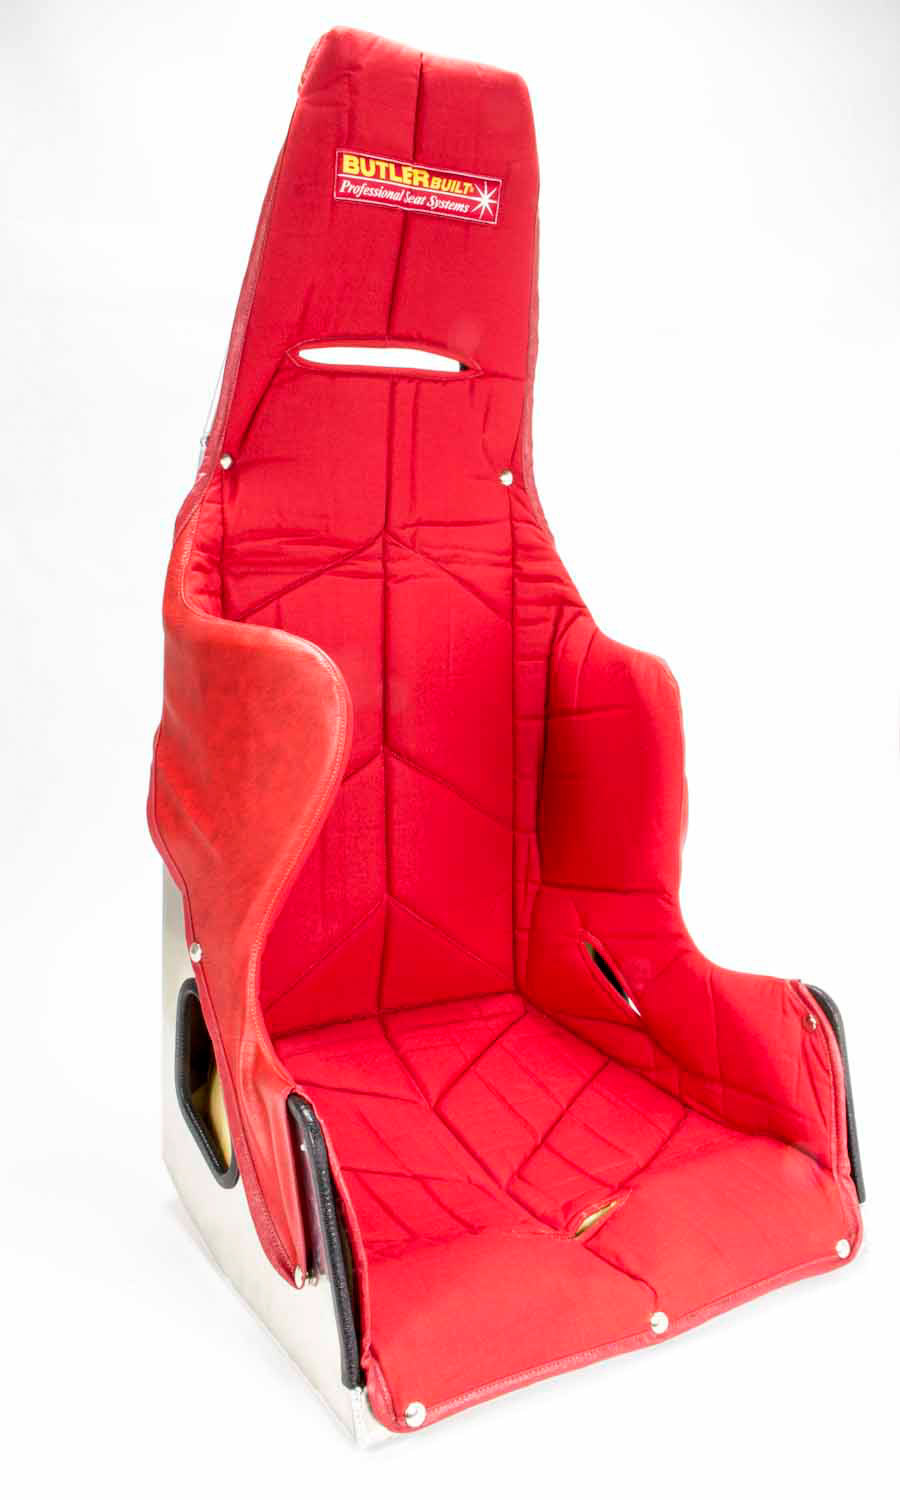 18in Red Seat & Cover - 18A120-65-4104